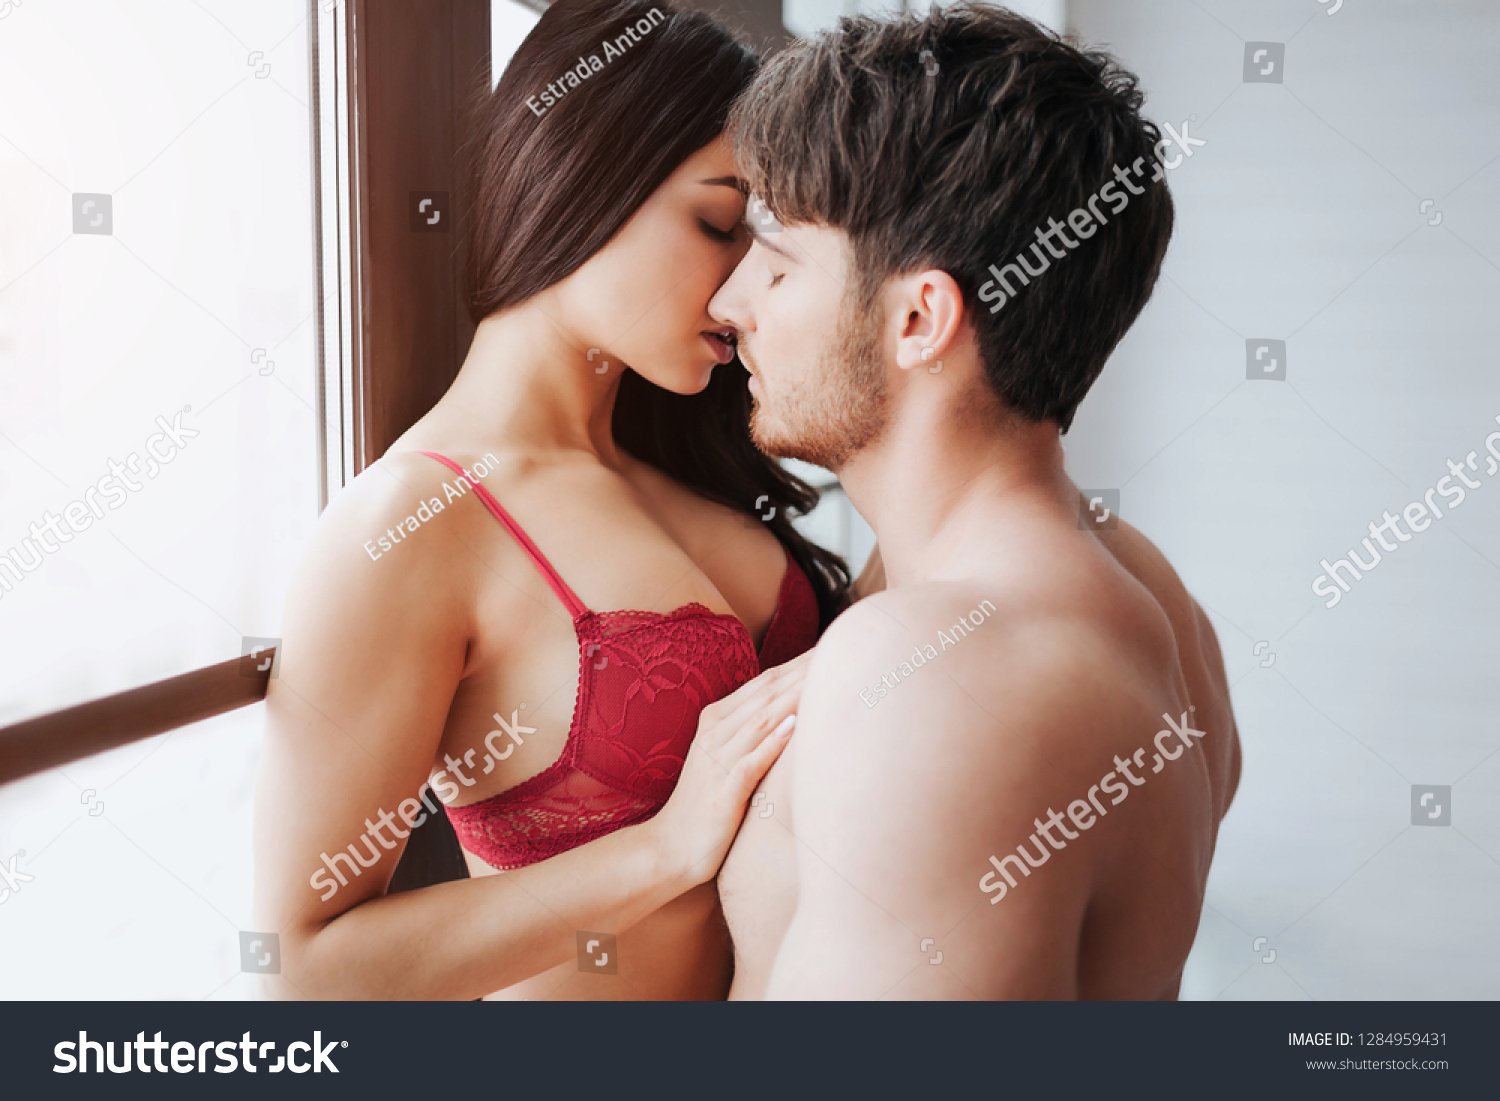 3,695 Bra Kissing Images, Stock Photos and Vectors Shutterstock